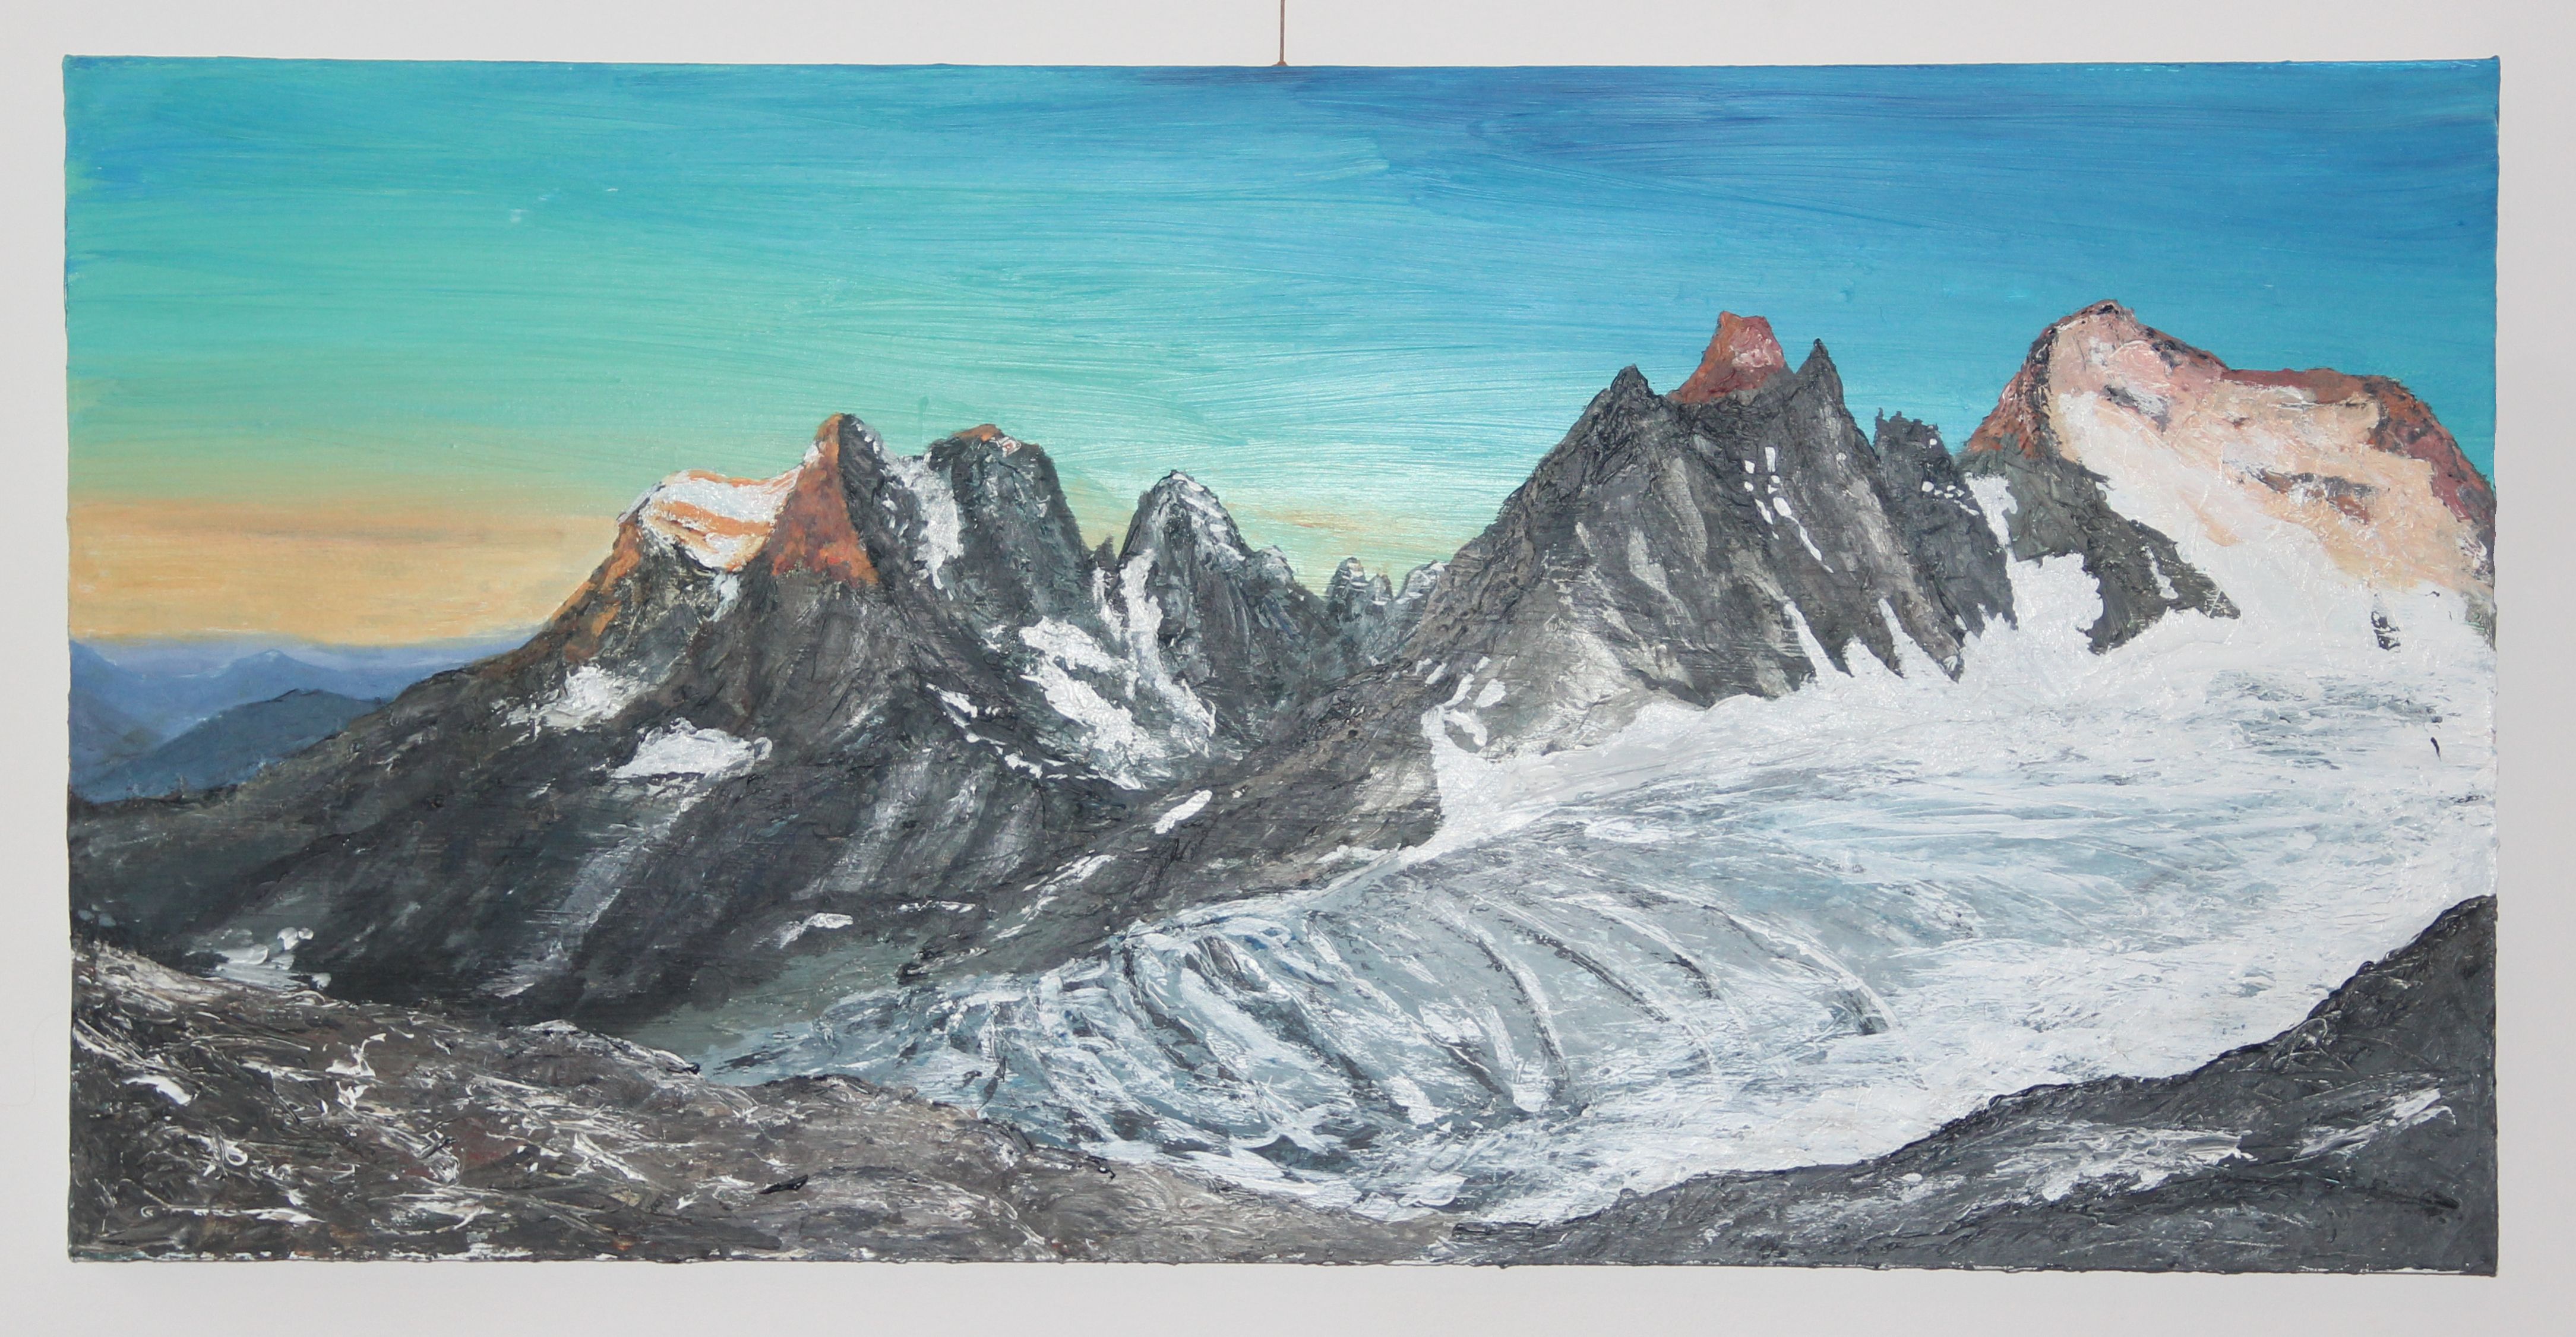 The Barre des Ecrins at Sunrise, acrylic on canvas.